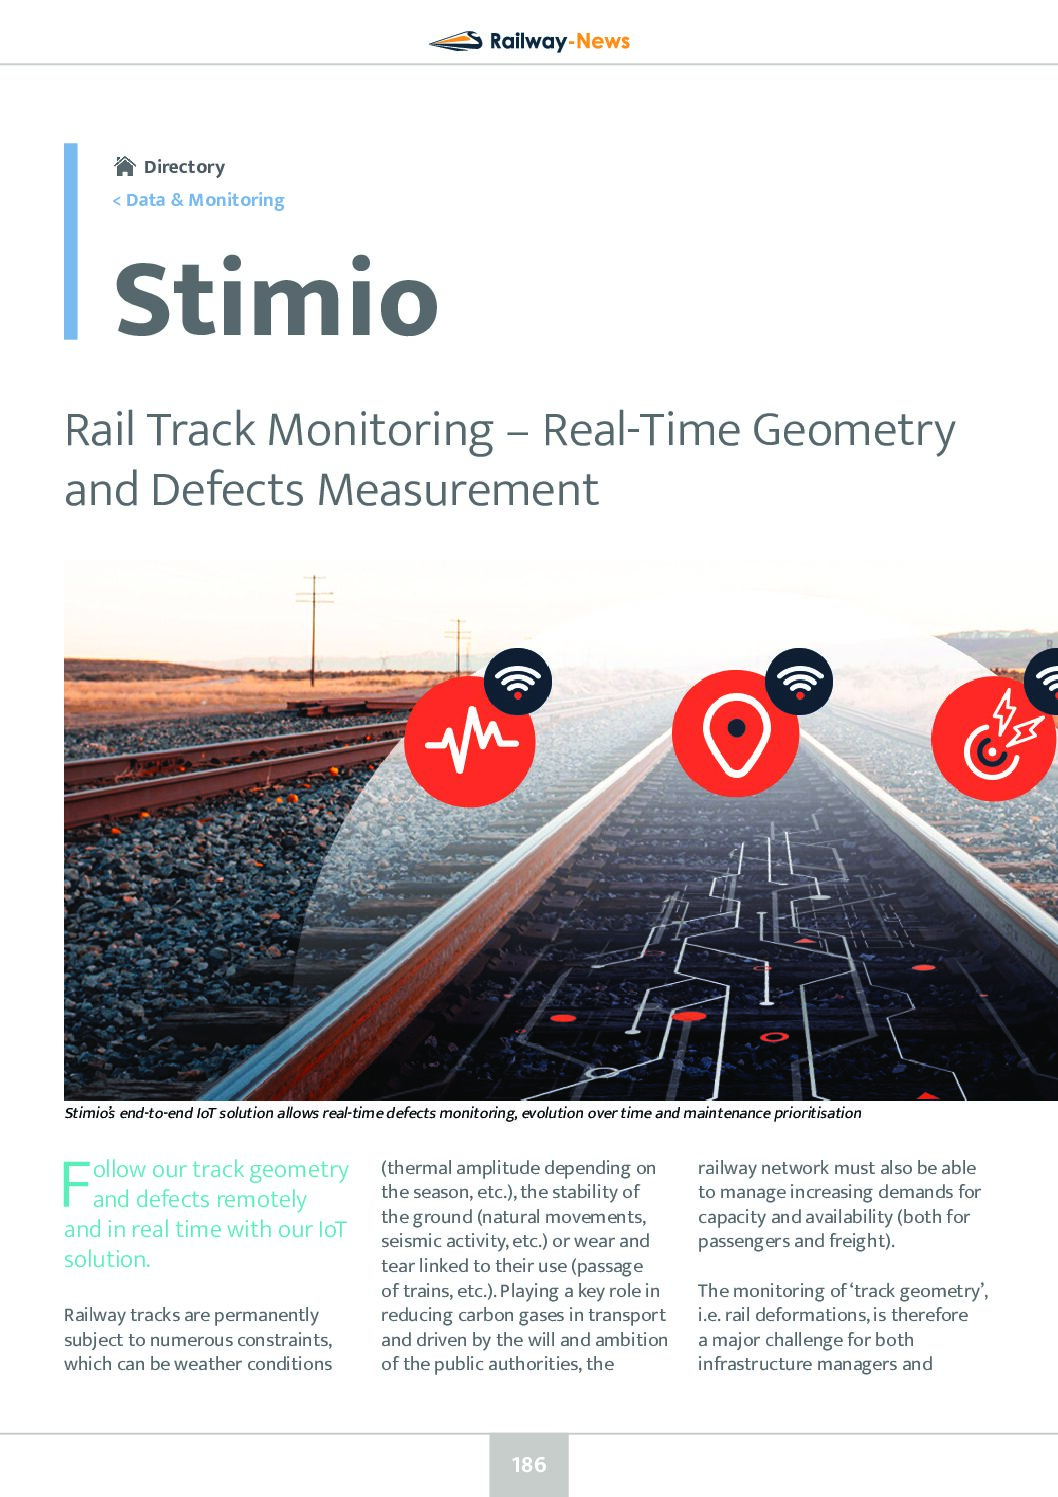 Rail Track Monitoring – Real-Time Geometry and Defects Measurement